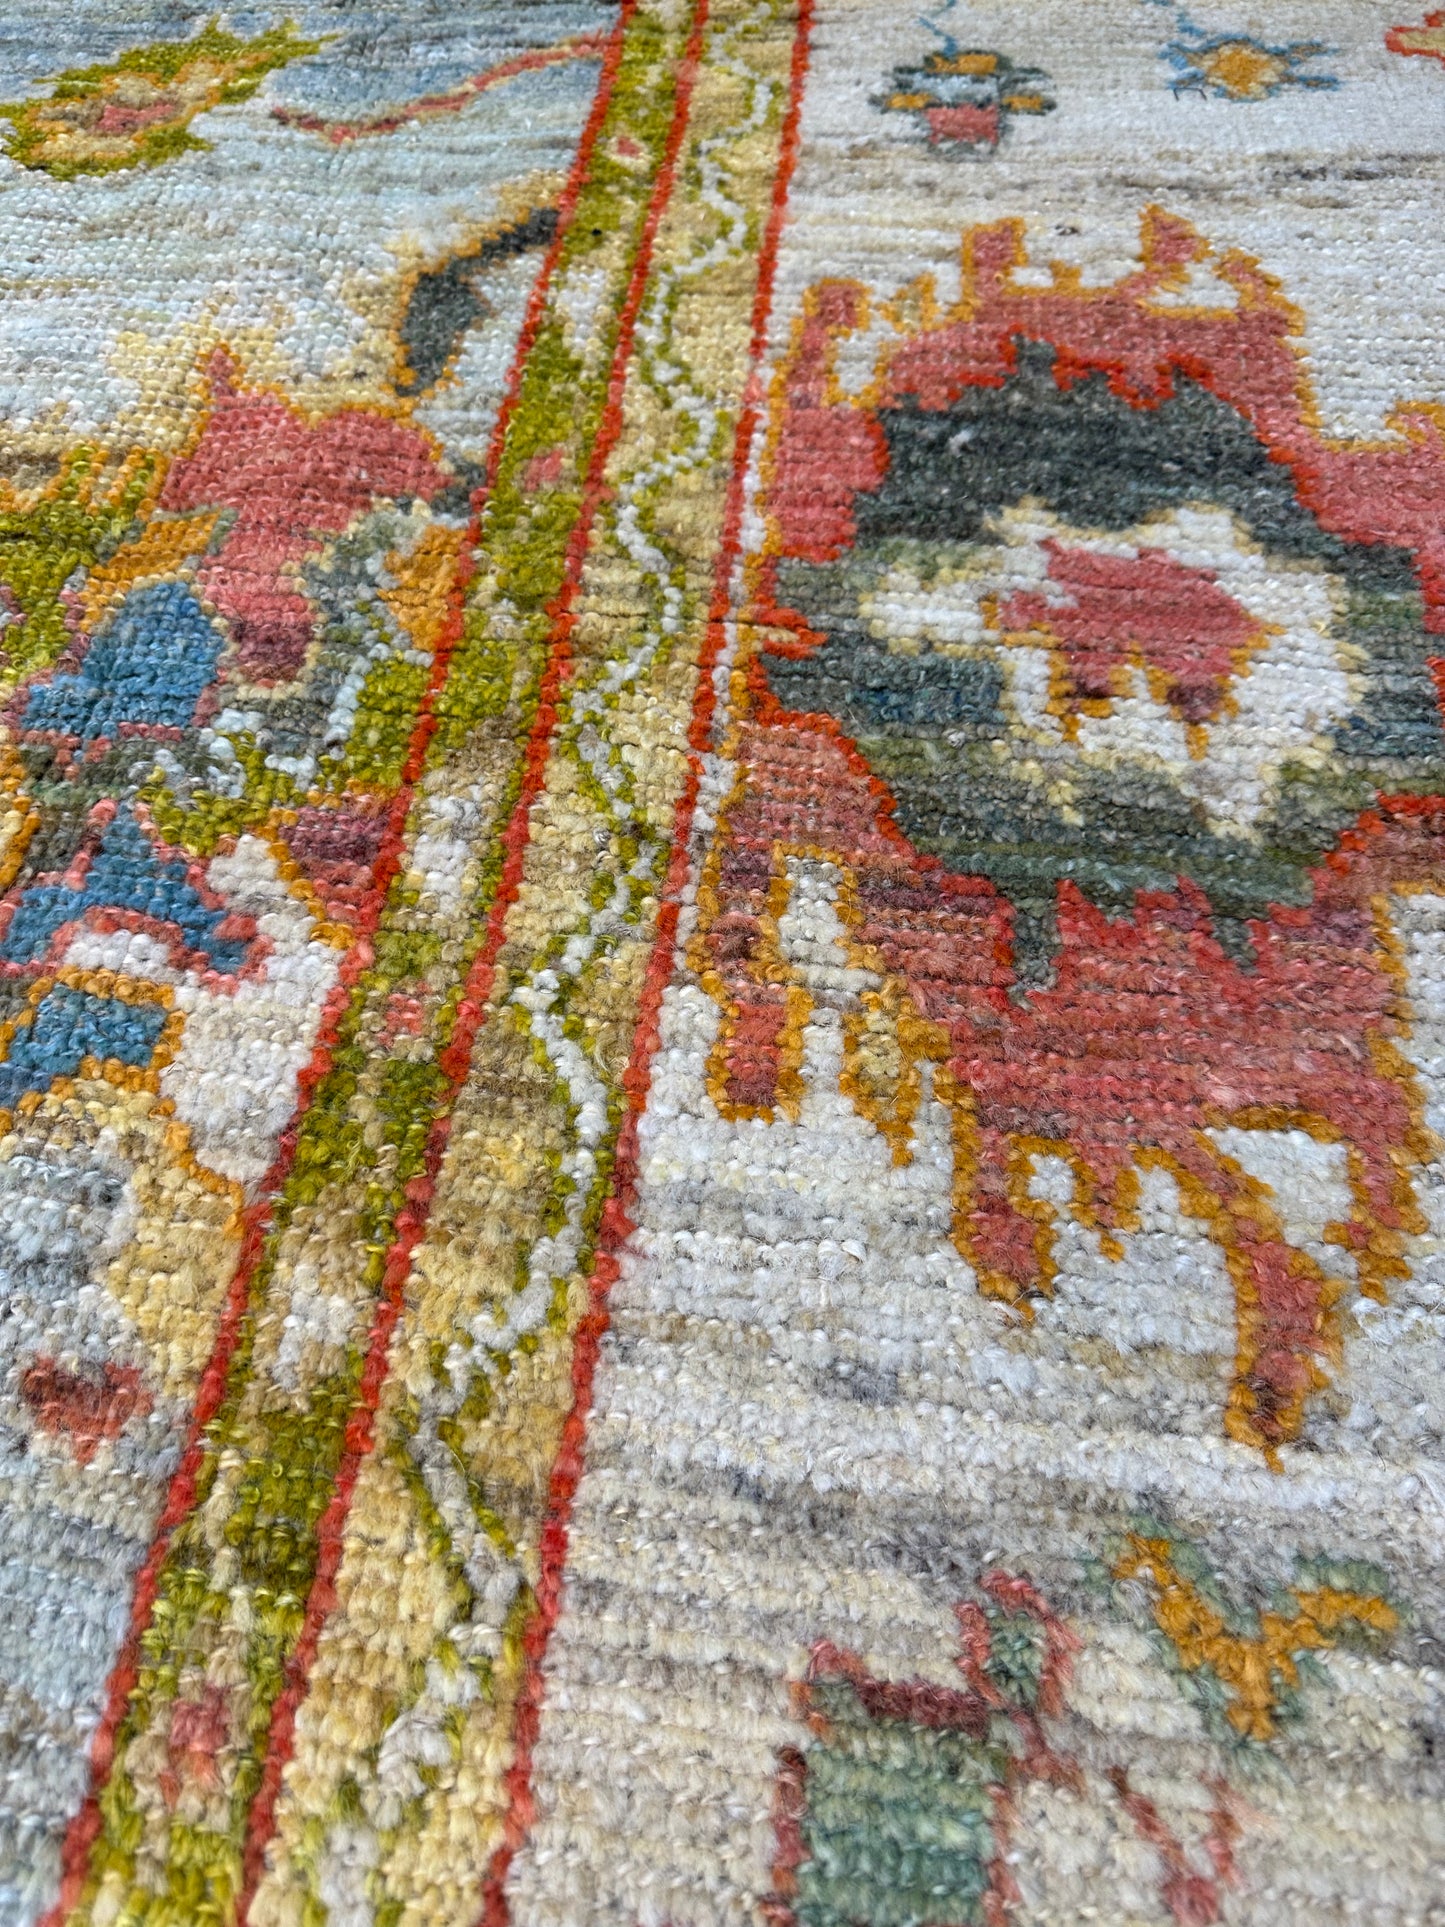 Hand-Knotted Wool Rug Turkish Oushak 9'6" x 10'4"